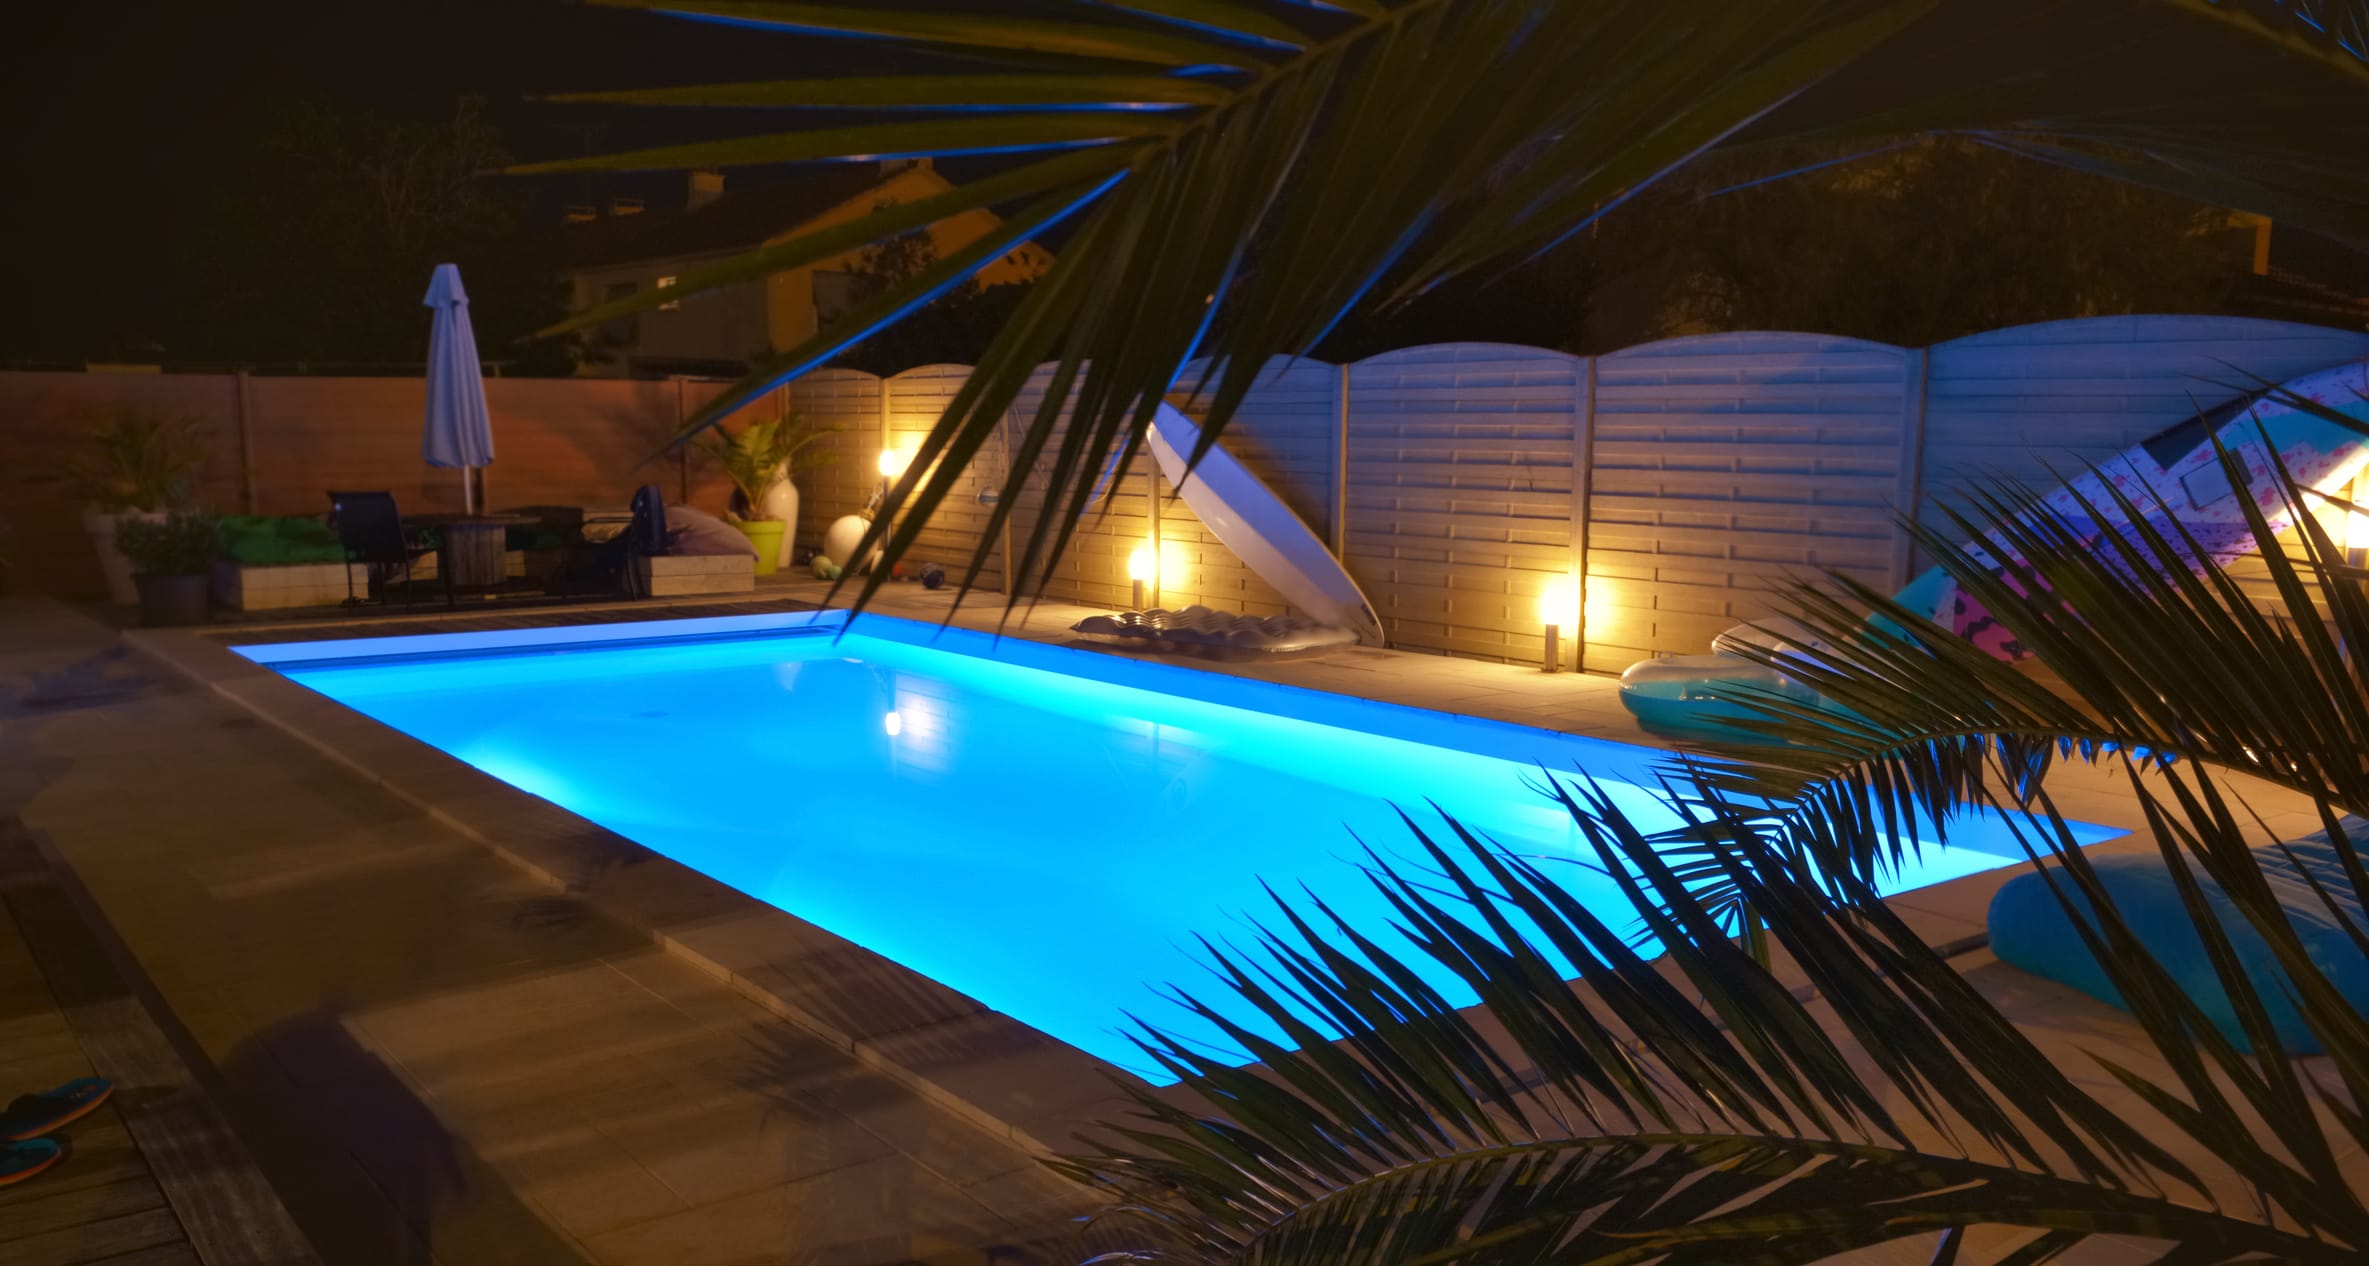 With upgrades pool builders can offer in their projects, Swimline has it all.